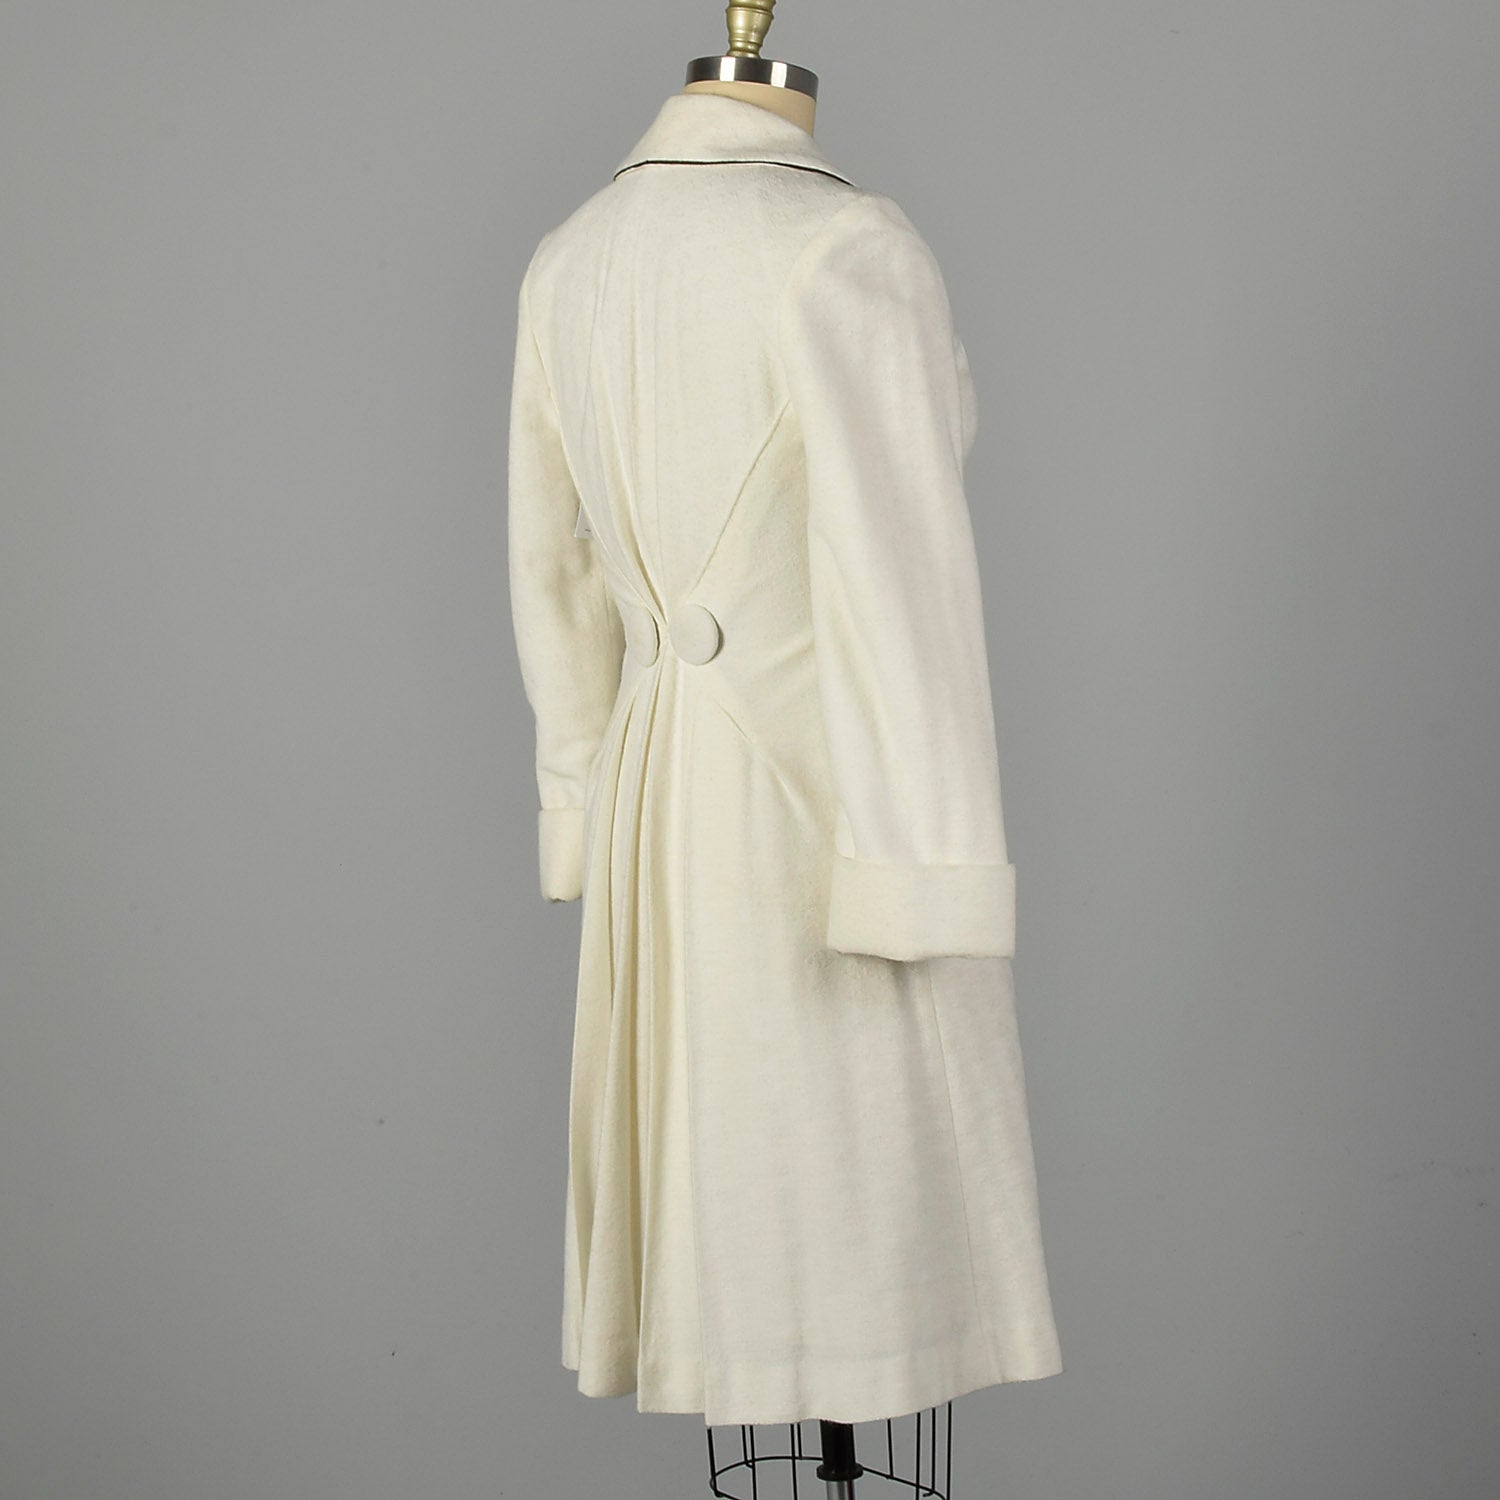 Medium 1960s White Knit Princess Coat with Huge Buttons Autumn Outerwear